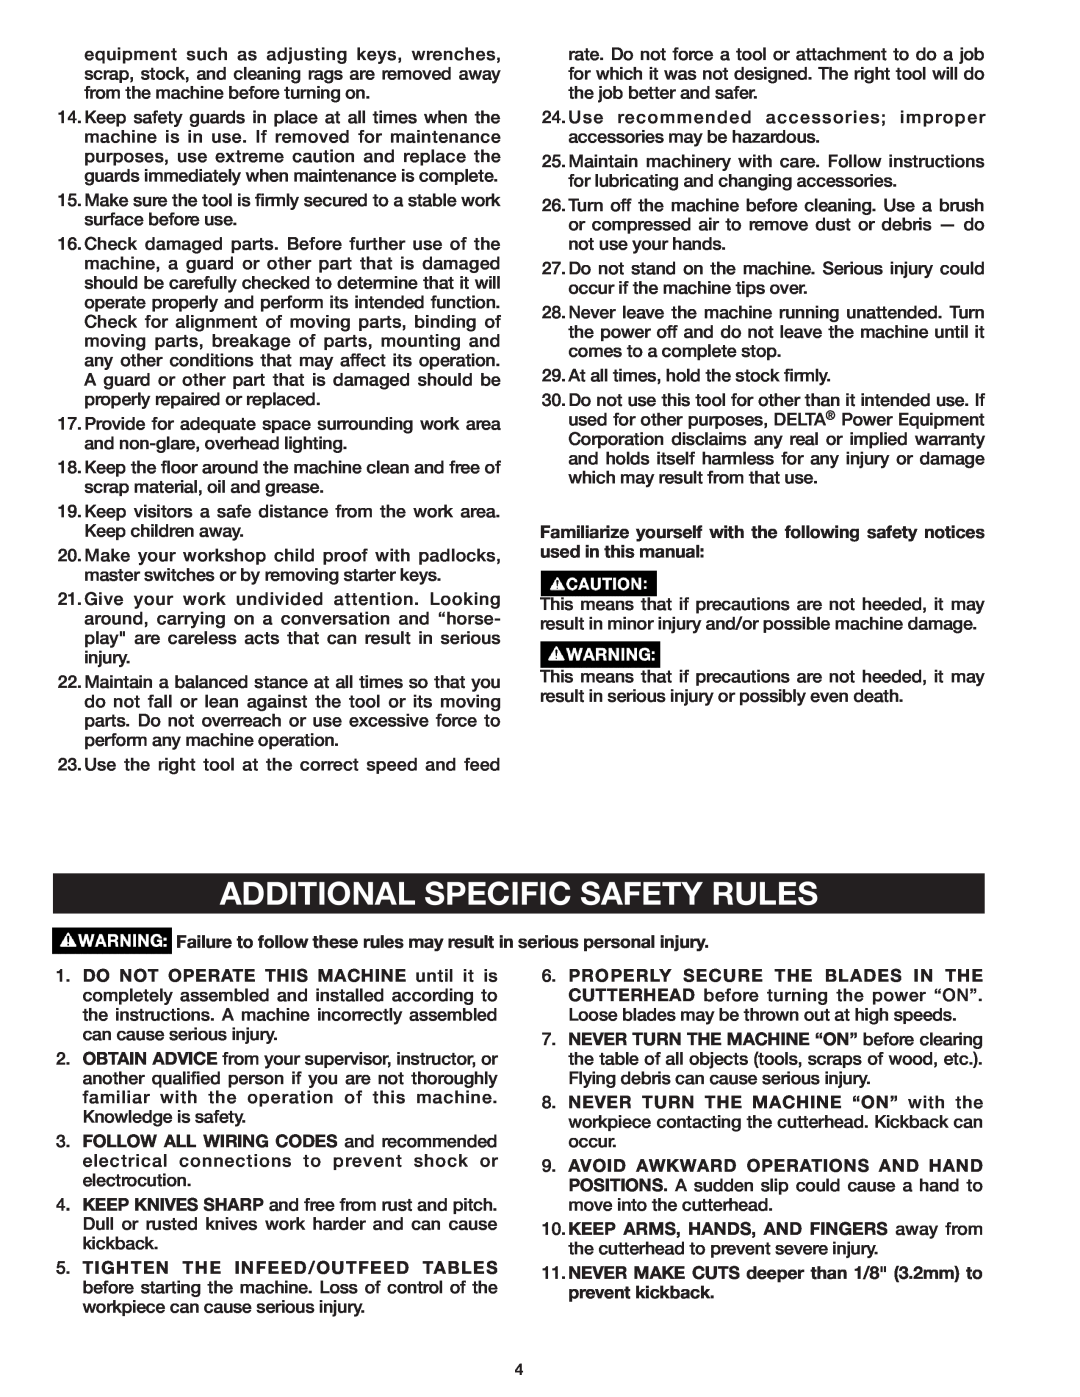 Delta 37-071 instruction manual Additional Specific Safety Rules 